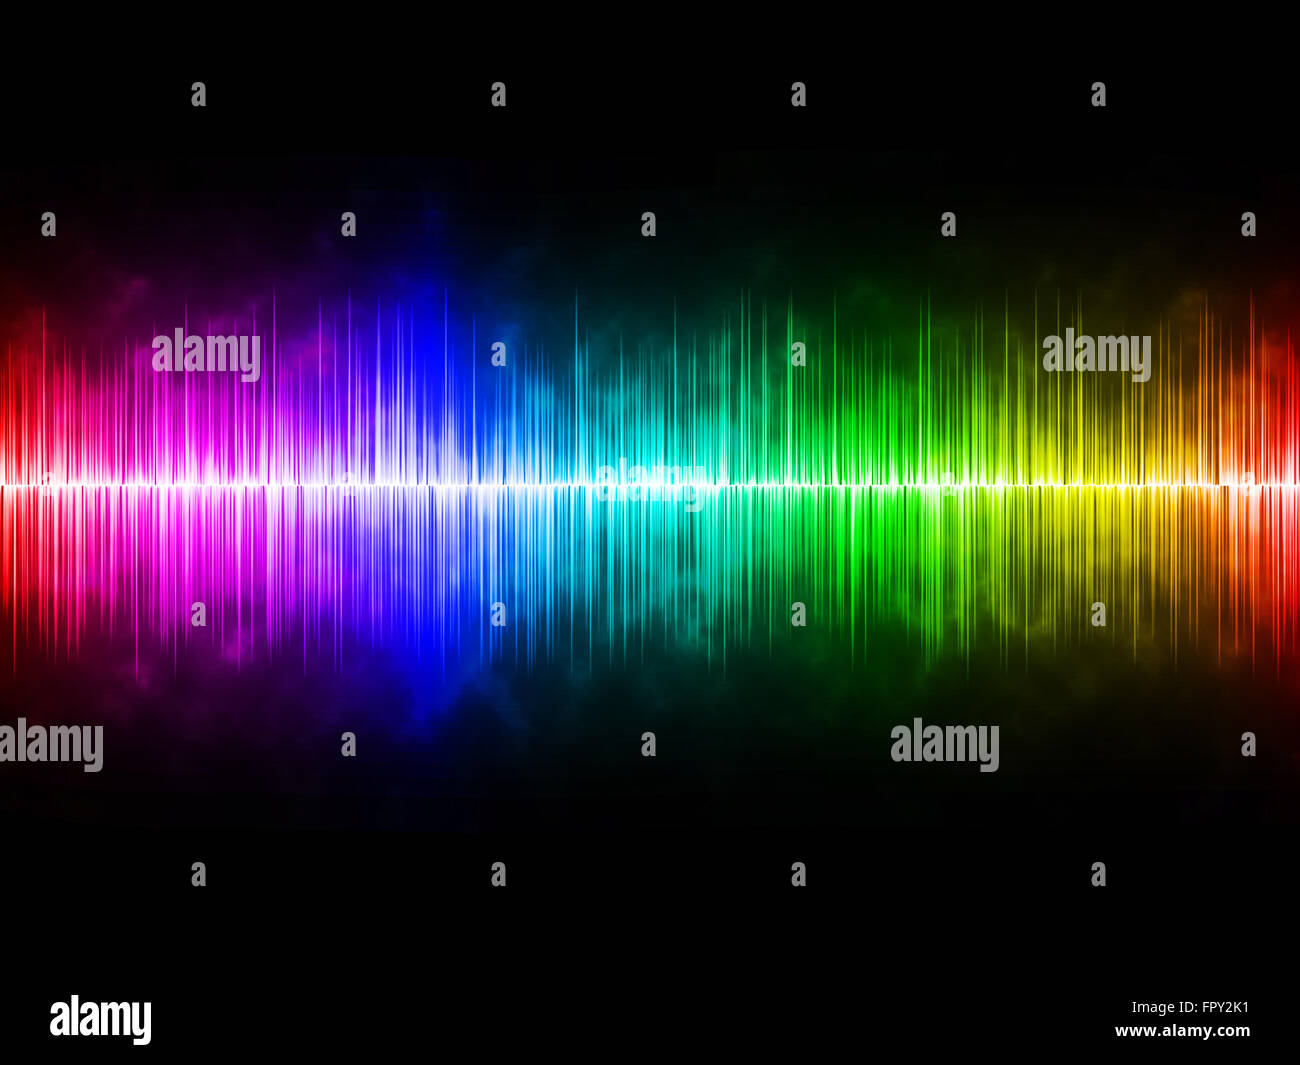 Neon wave sound vector background. Music soundwave design, purple light  elements isolated on dark backdrop. Radio frequency beat lines Stock Vector